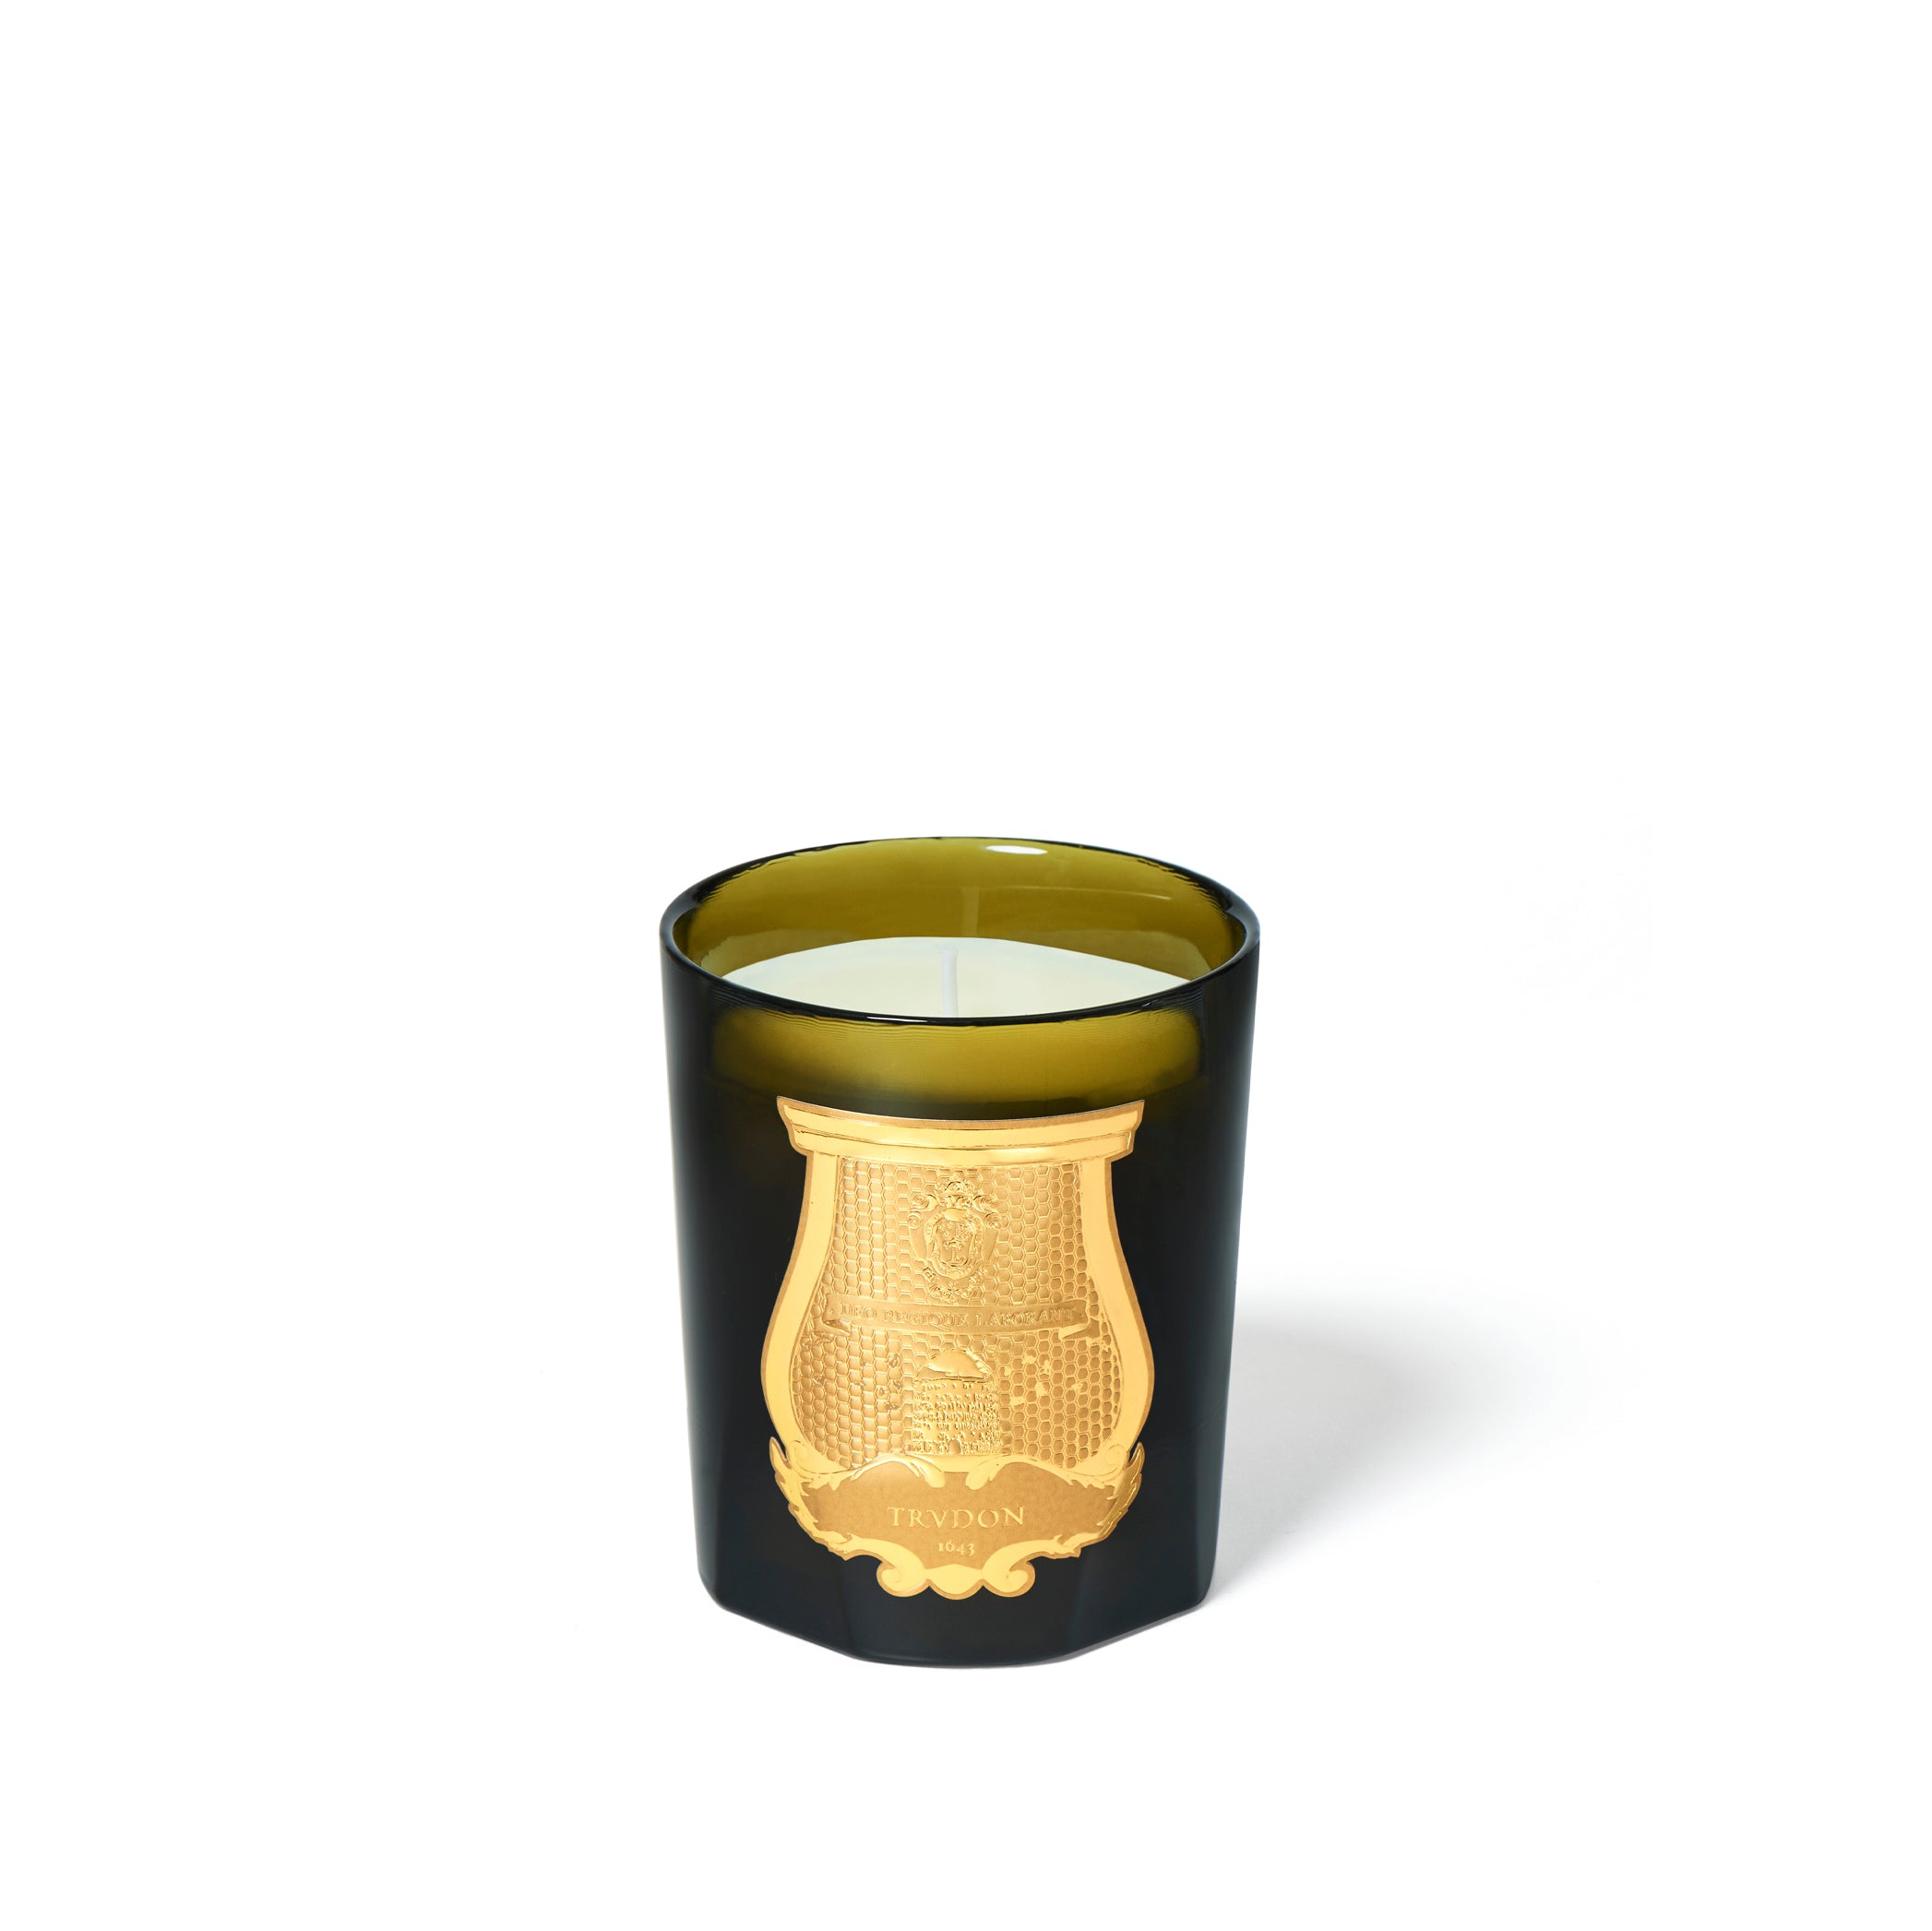 Classic Candle 'Gabriel' by Trudon, 270g